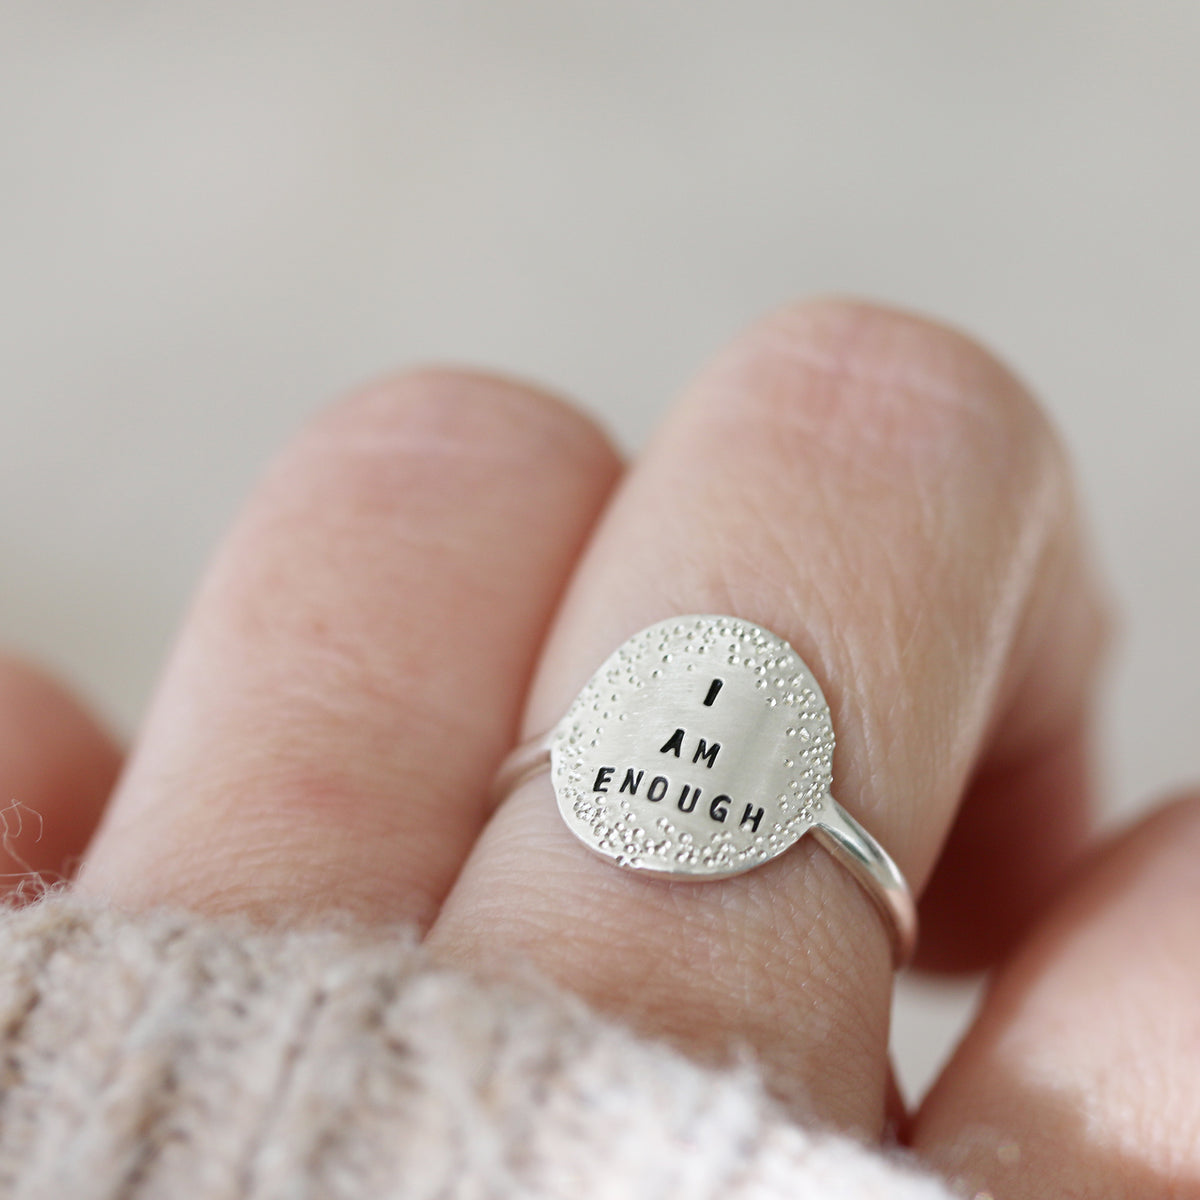 SMALL COIN RING